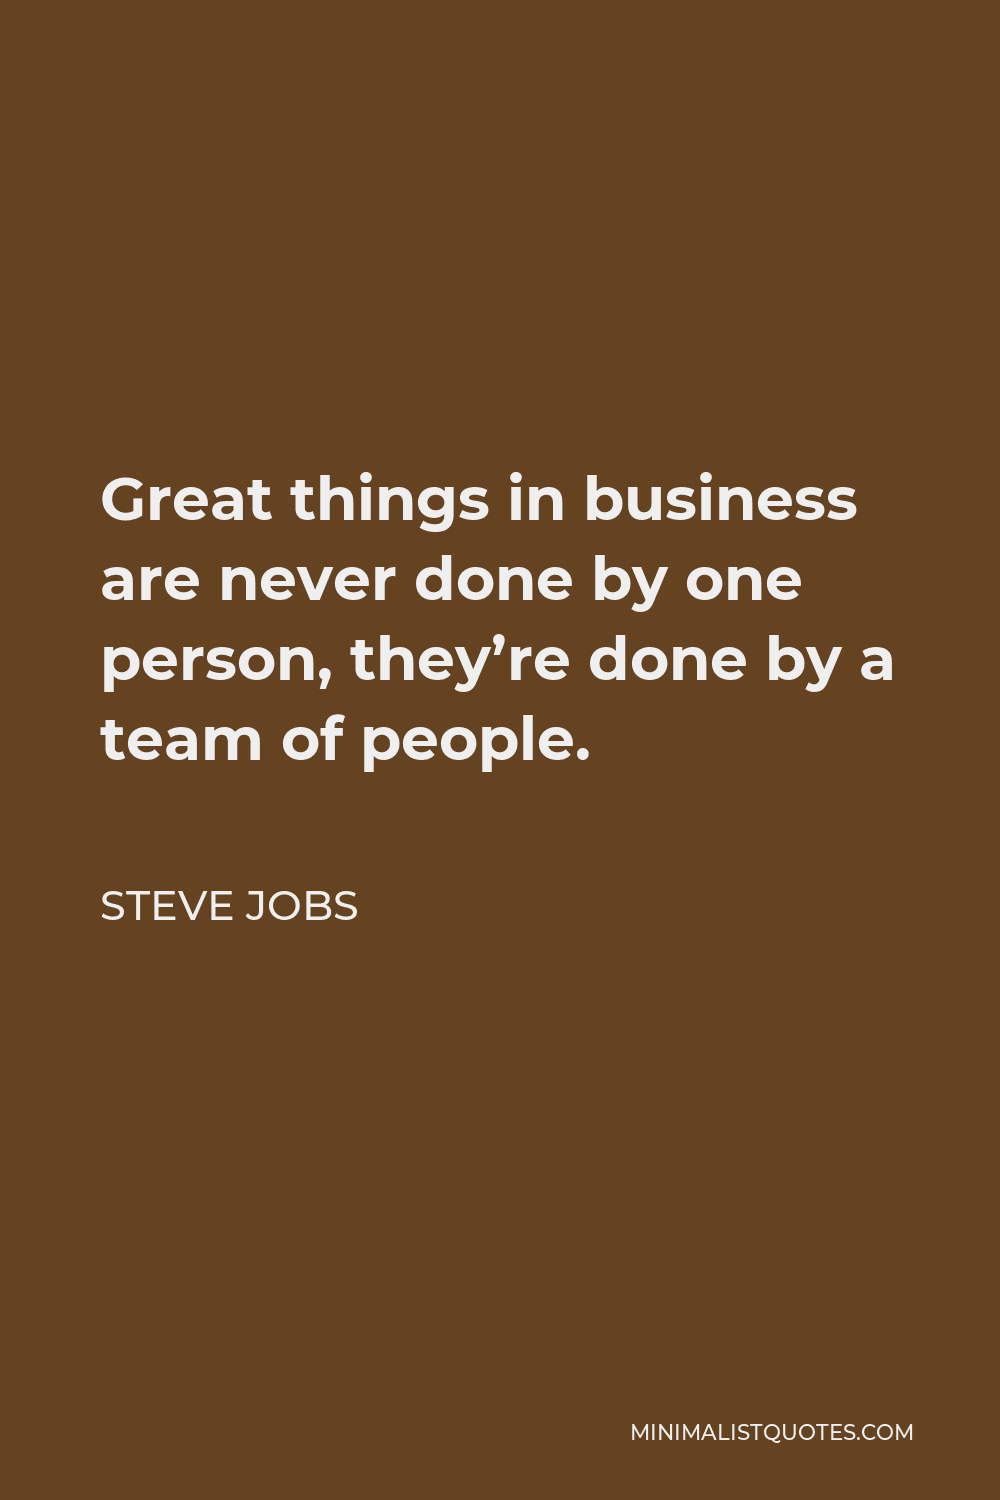 Steve Jobs Quote: Great things in business are never done by one person ...